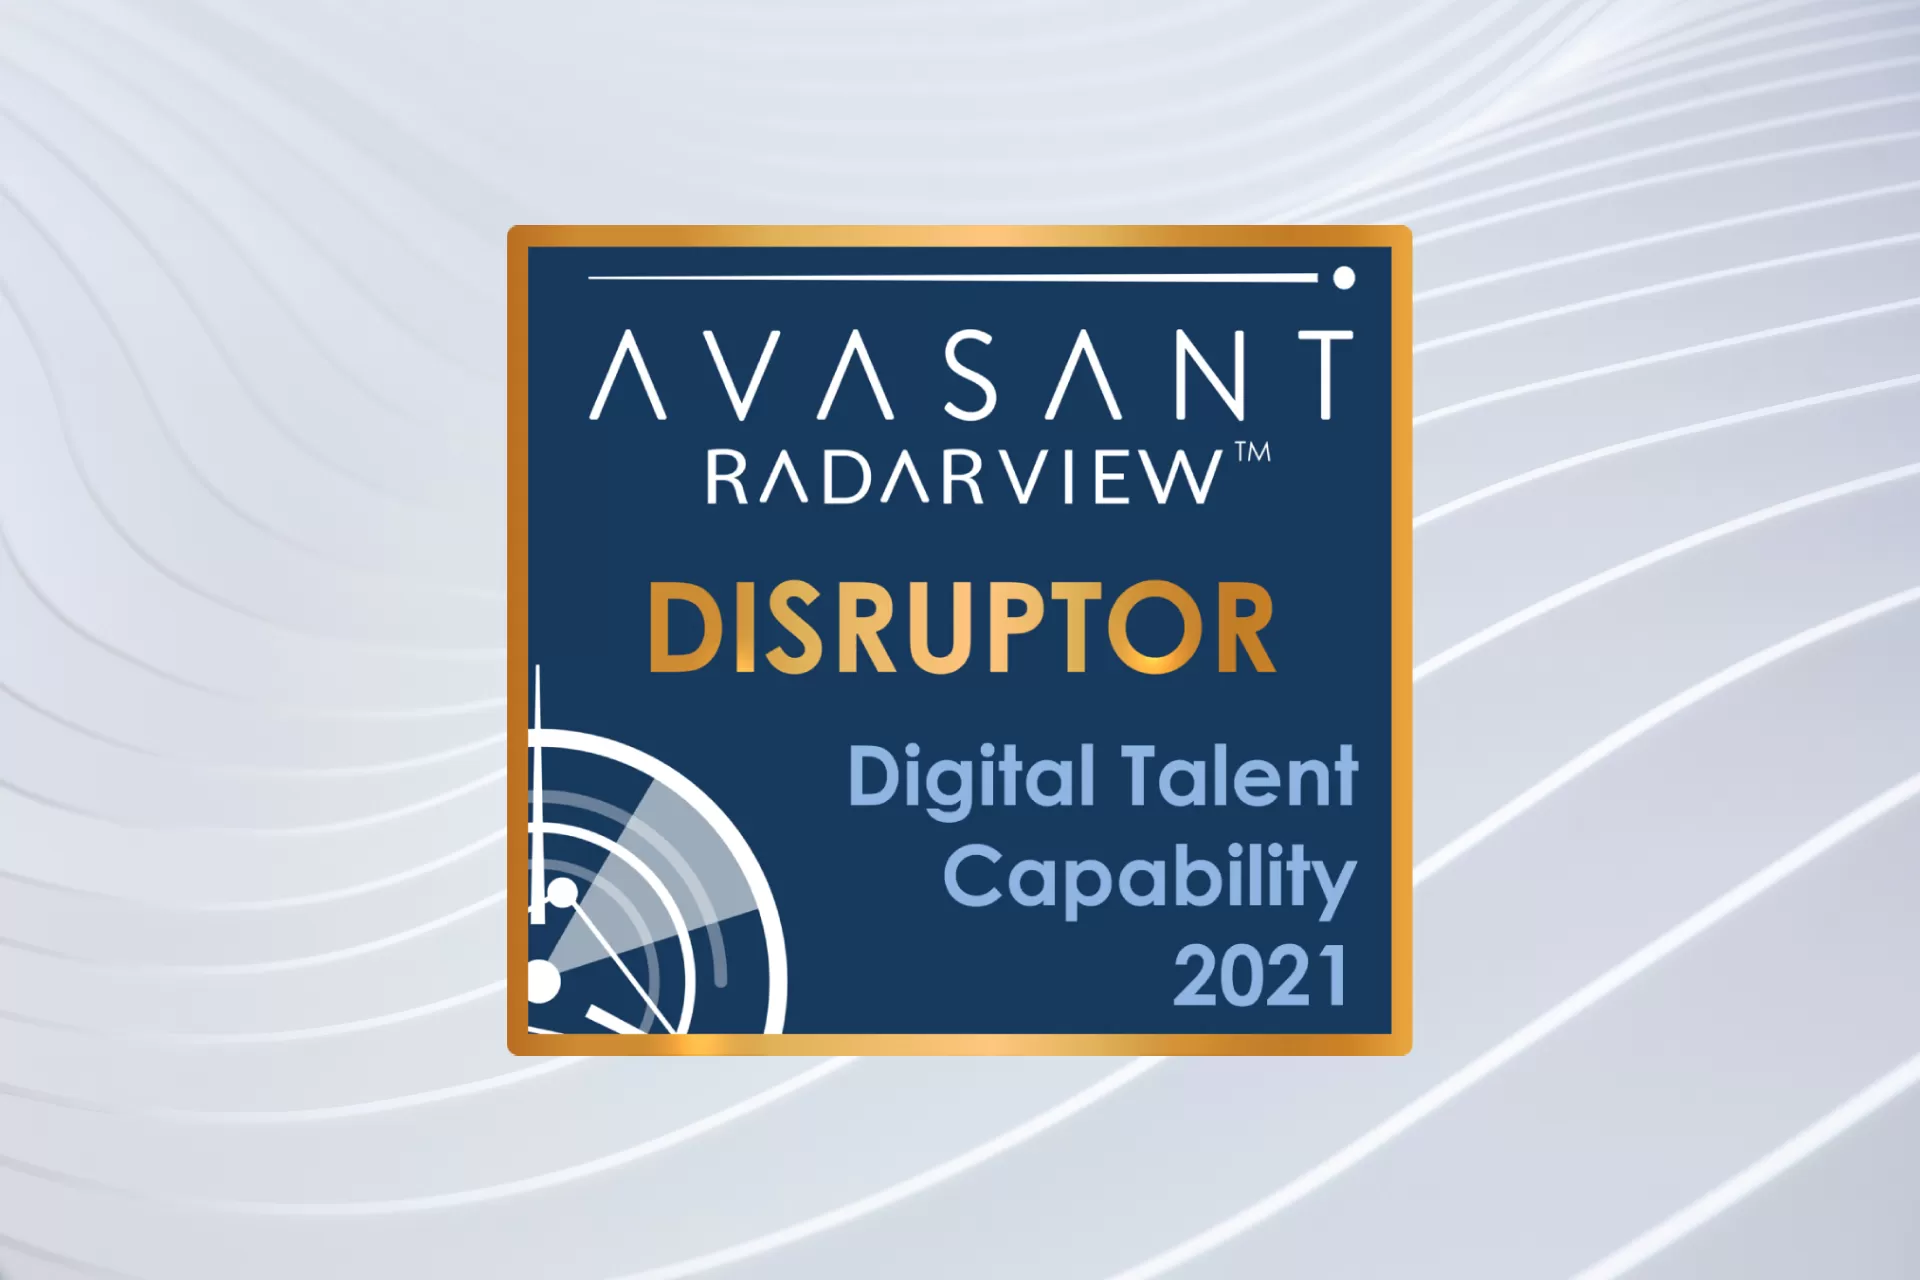  Zensar has been recognized as a “Disruptor” in Avasant’s Digital Talent Capability 2021 RadarView™ 